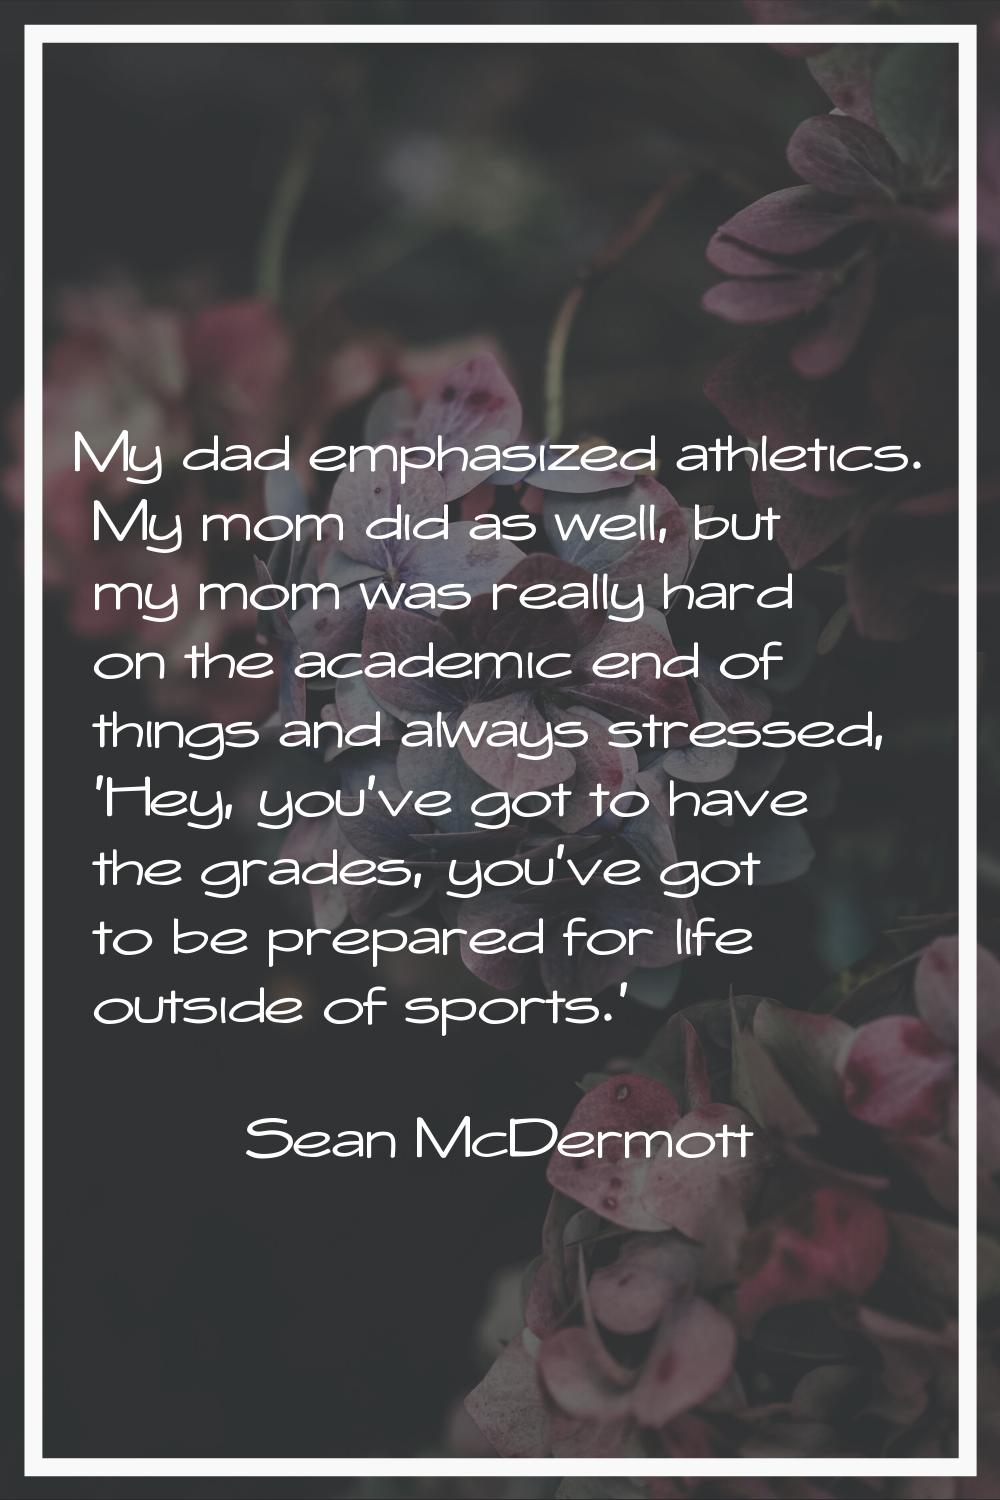 My dad emphasized athletics. My mom did as well, but my mom was really hard on the academic end of 